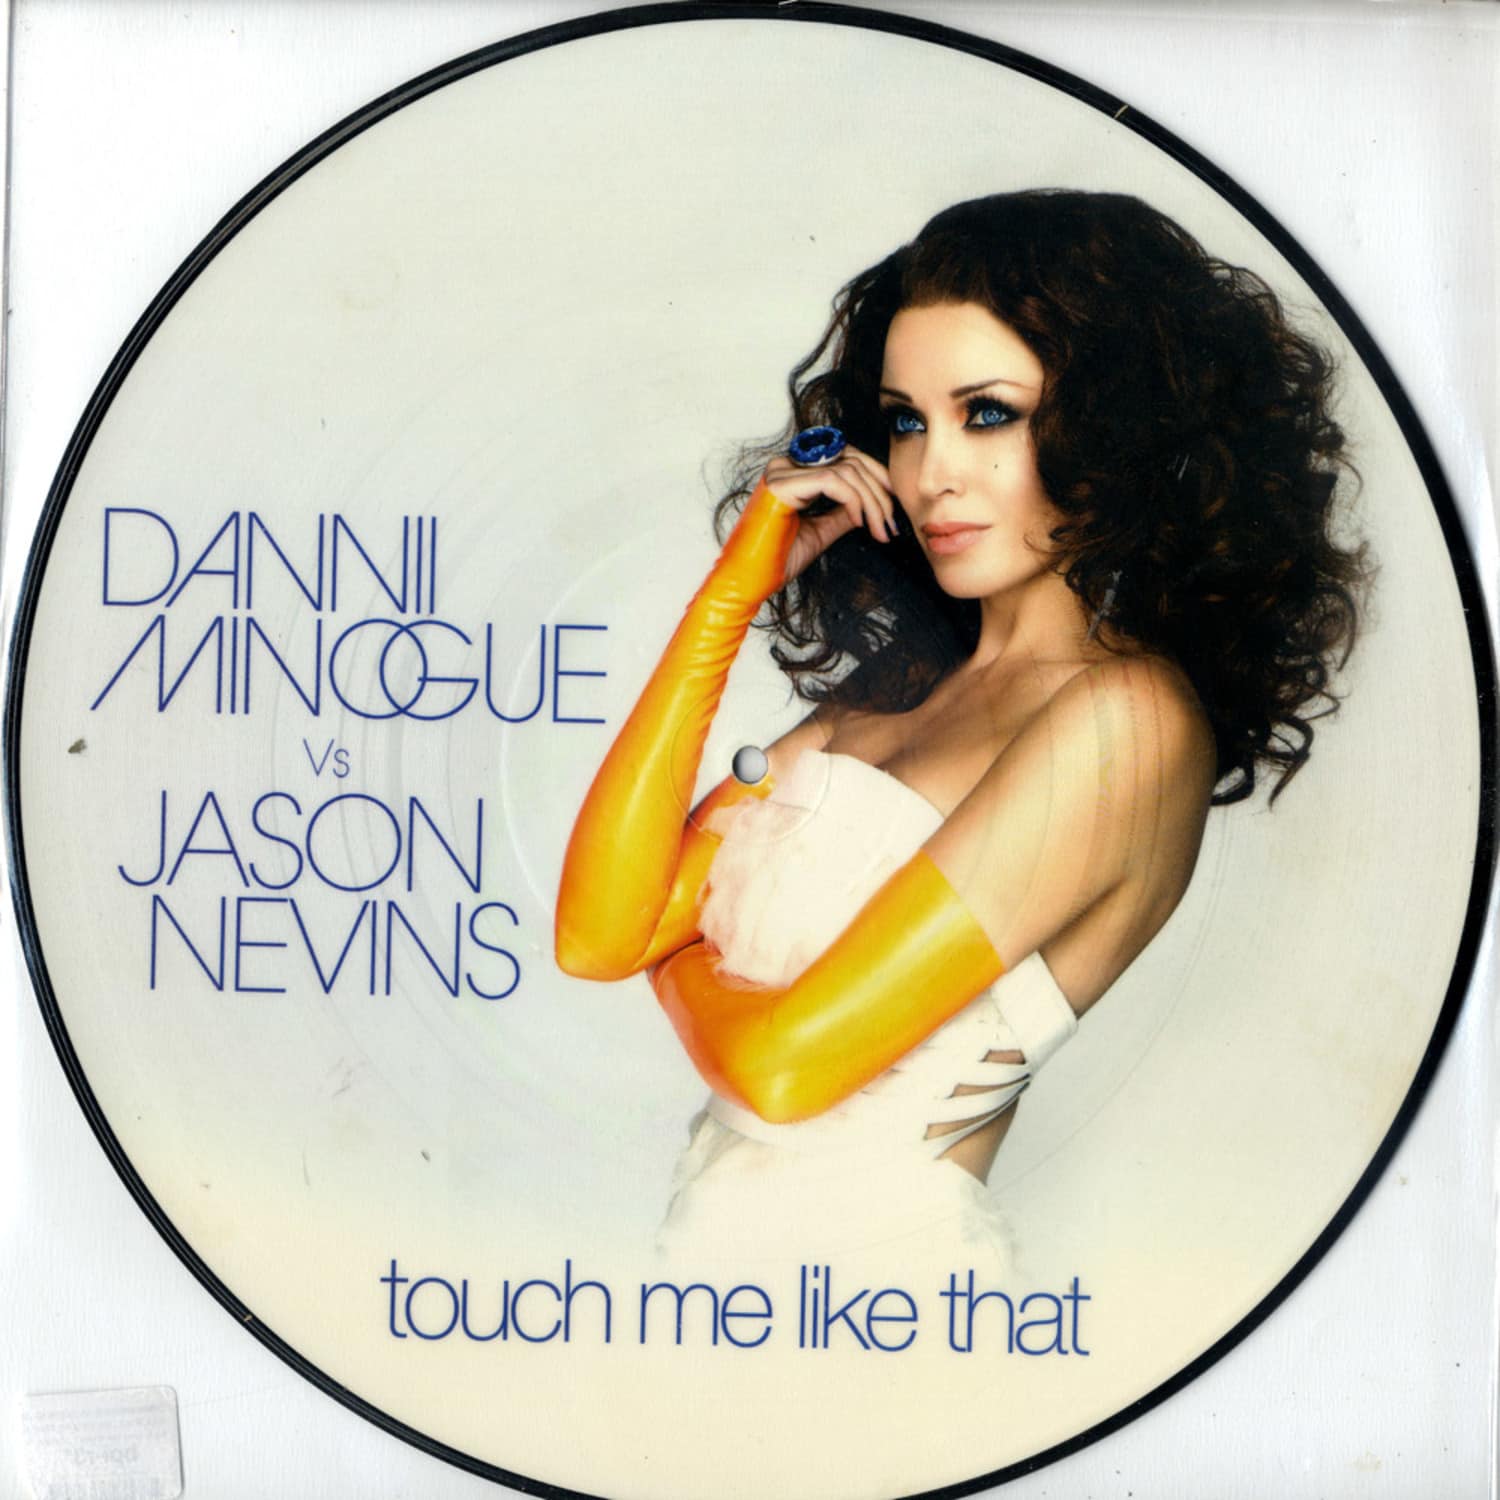 Dannii Minogue vs. Jason Nevins - TOUCH ME LIKE THAT PICTURE DISK